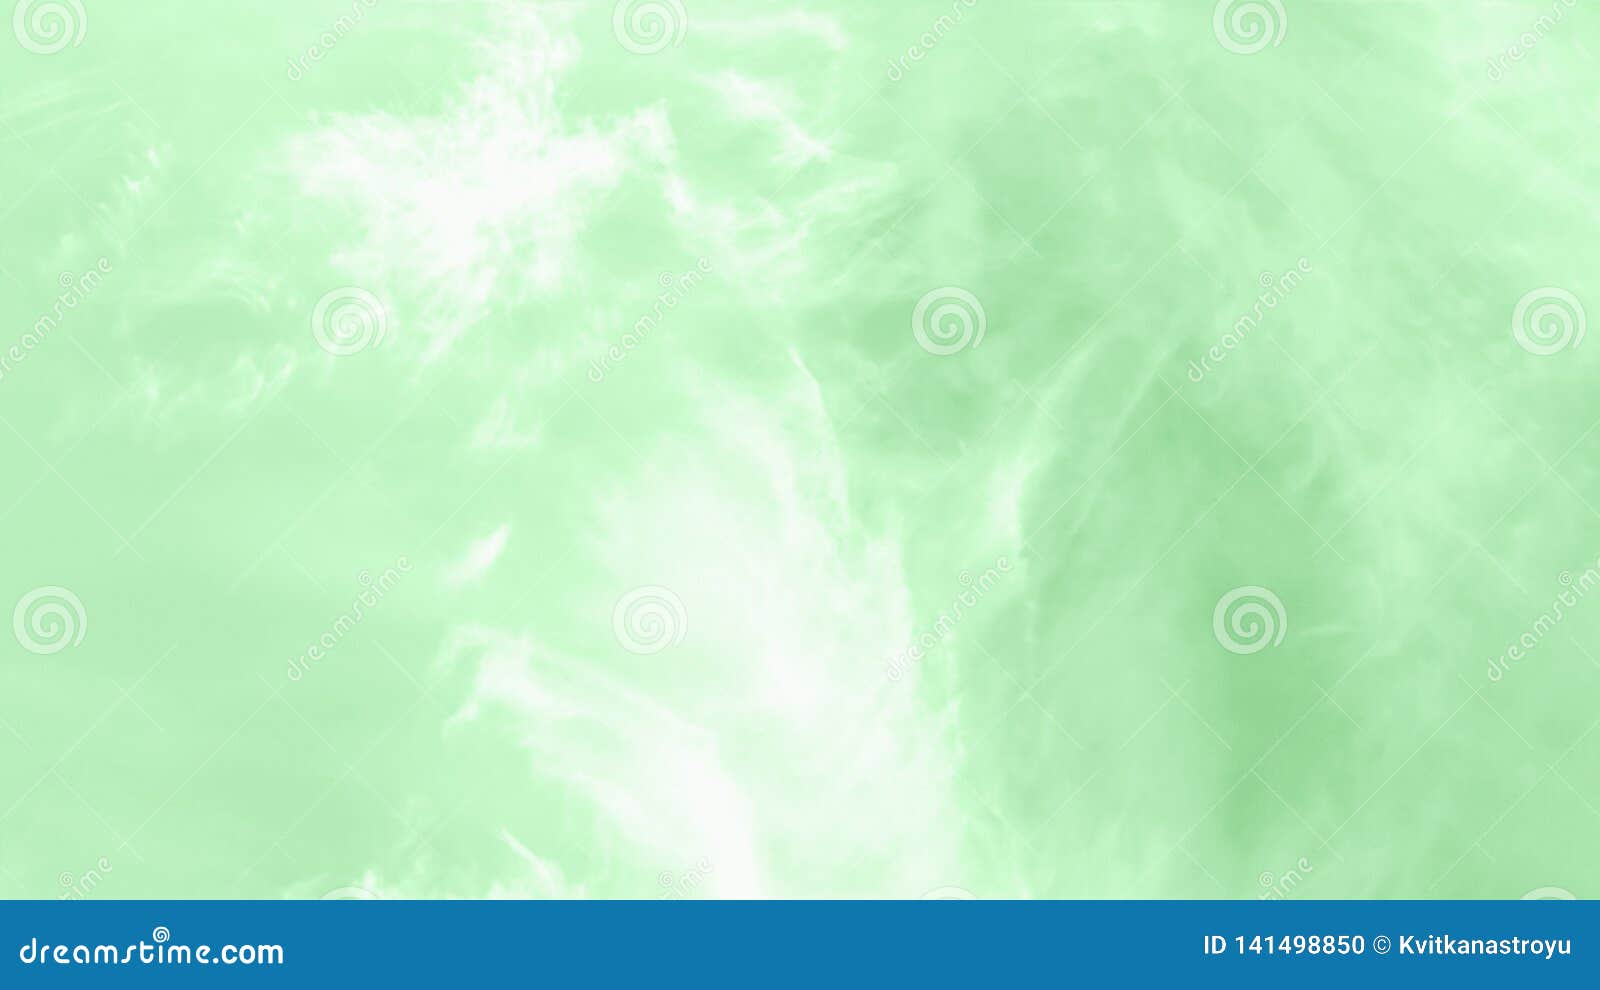 green mint sky with cirro cumulus clouds. looks like a marble texture. 16:9